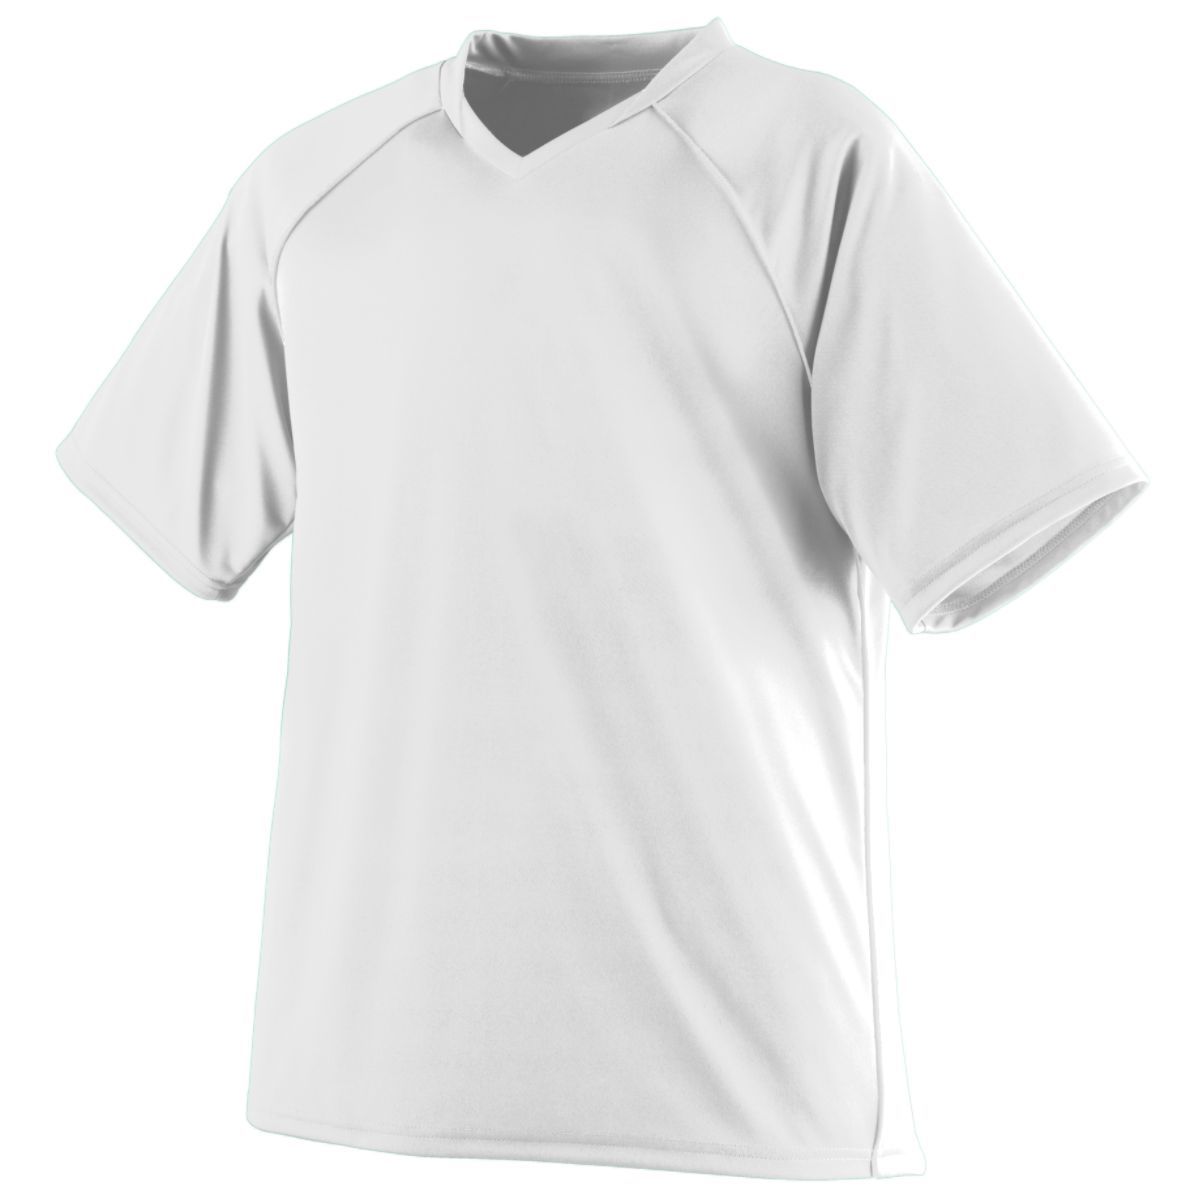 Augusta Sportswear Striker Jersey in White/White  -Part of the Adult, Adult-Jersey, Augusta-Products, Soccer, Shirts, All-Sports-1 product lines at KanaleyCreations.com